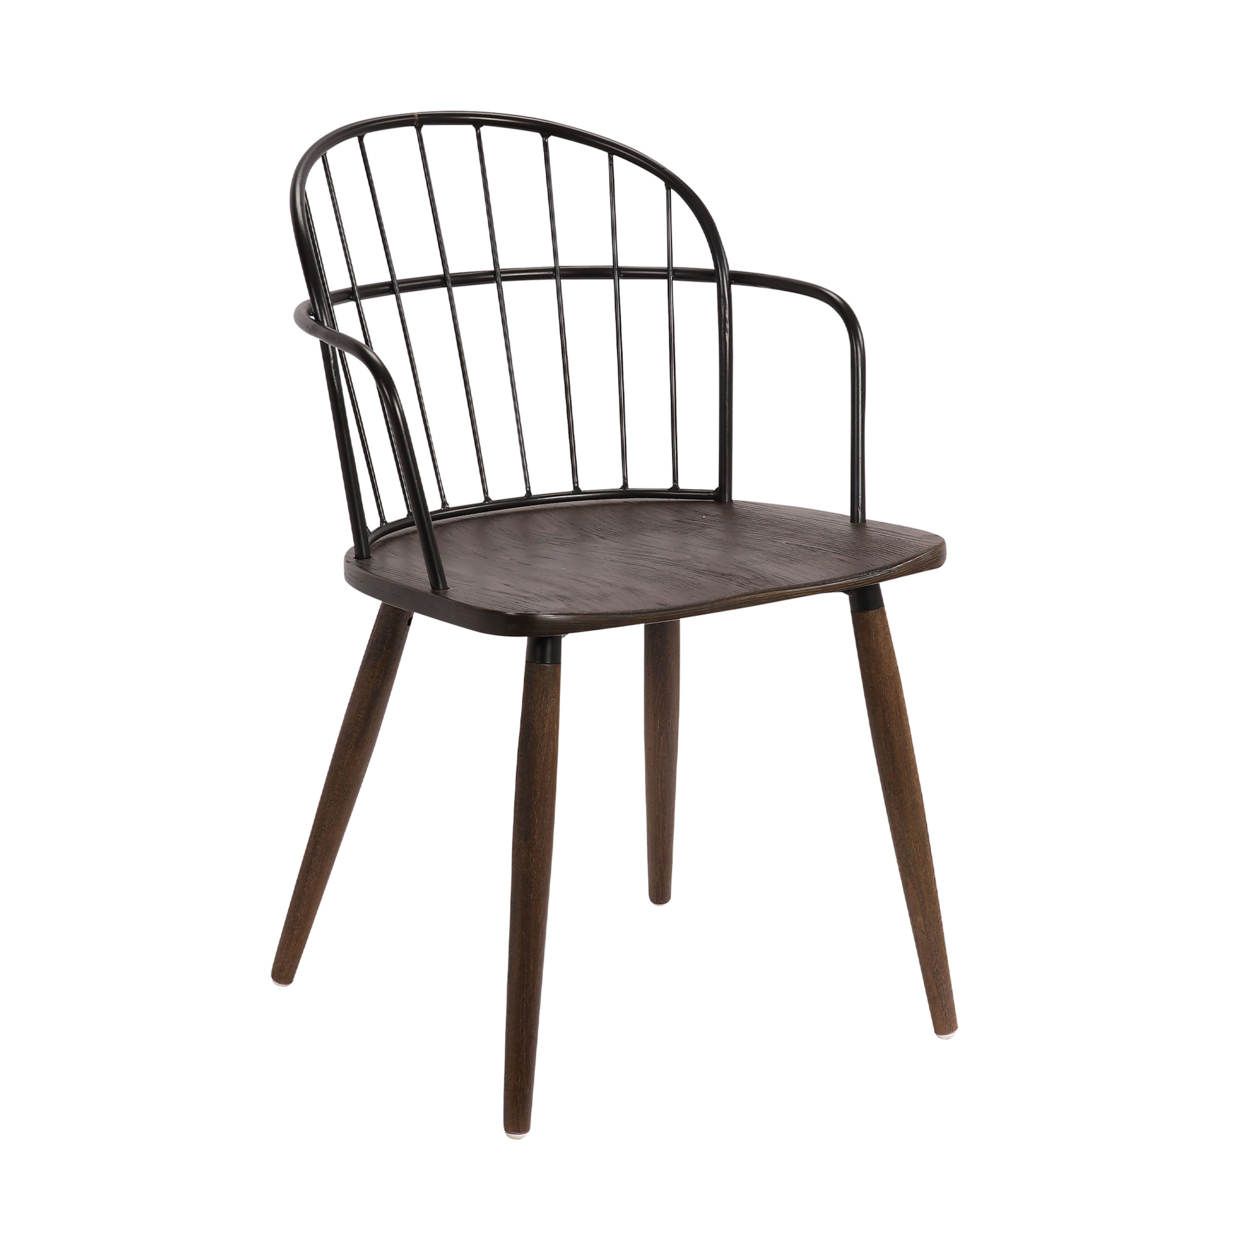 Metal Frame Side Chair With Open Backrest, Black And Brown- Saltoro Sherpi